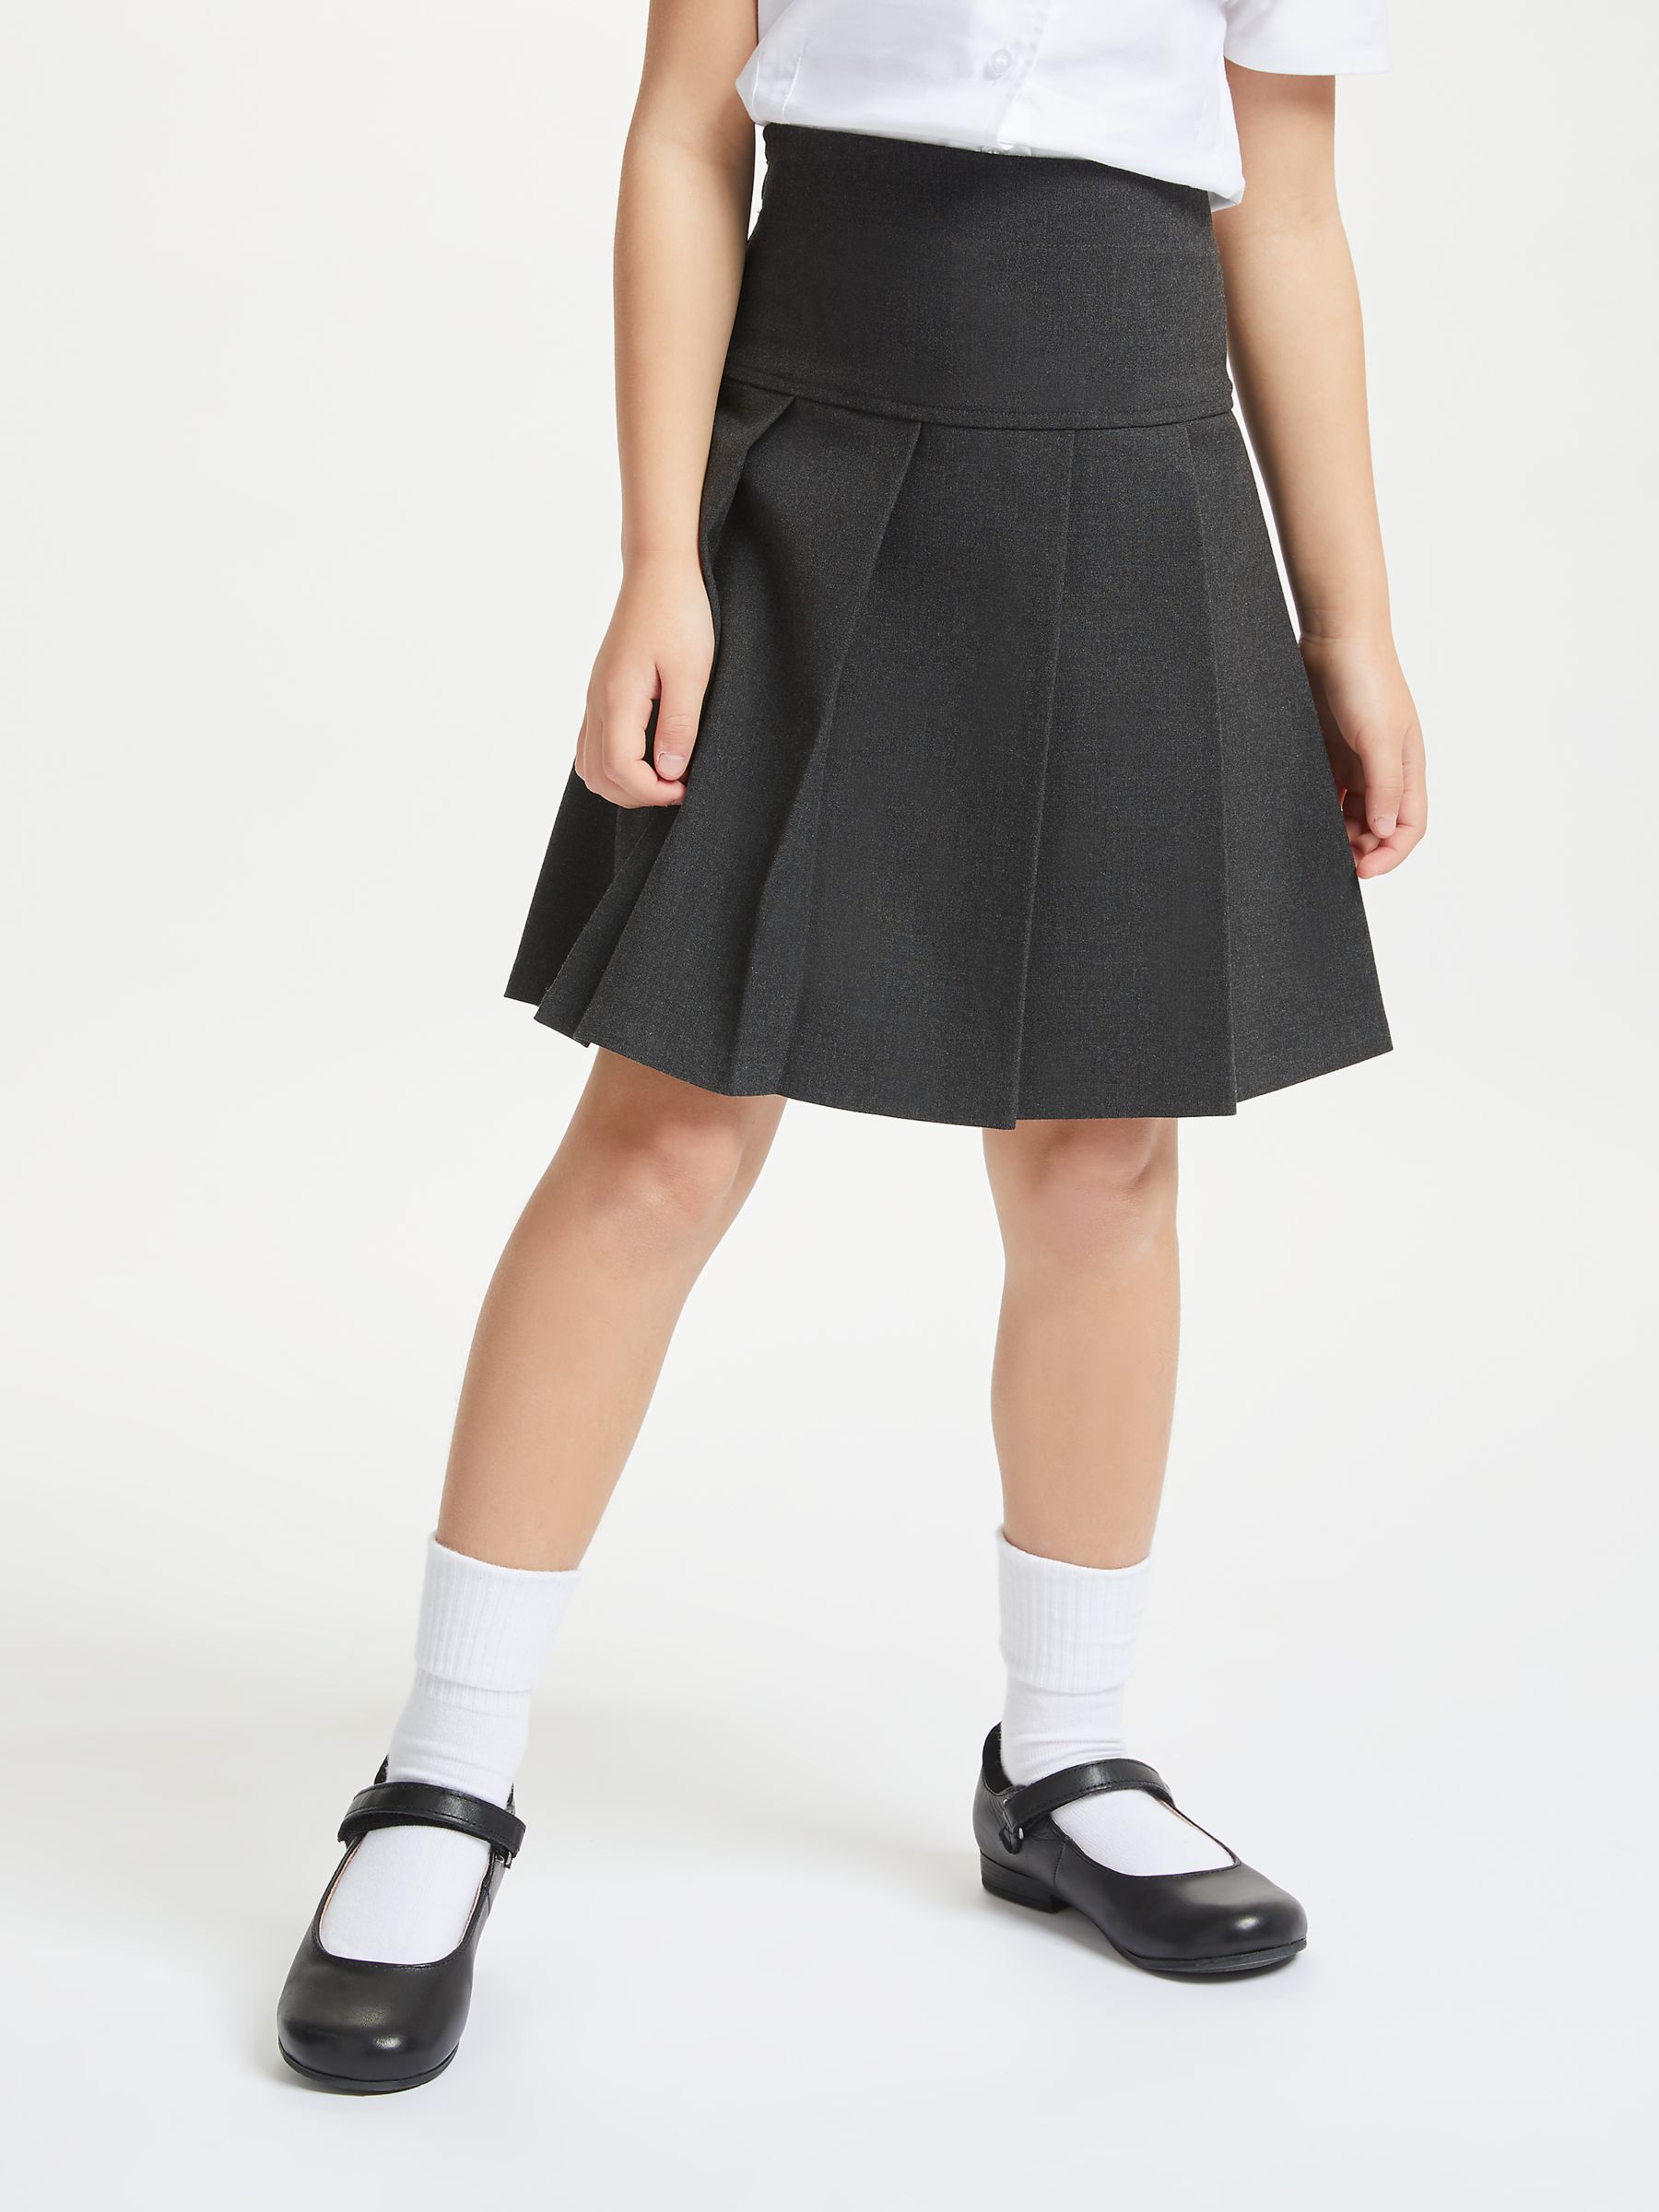 Buy Black Jersey Stretch Pull-On Pencil Skirt (3-18yrs) from the